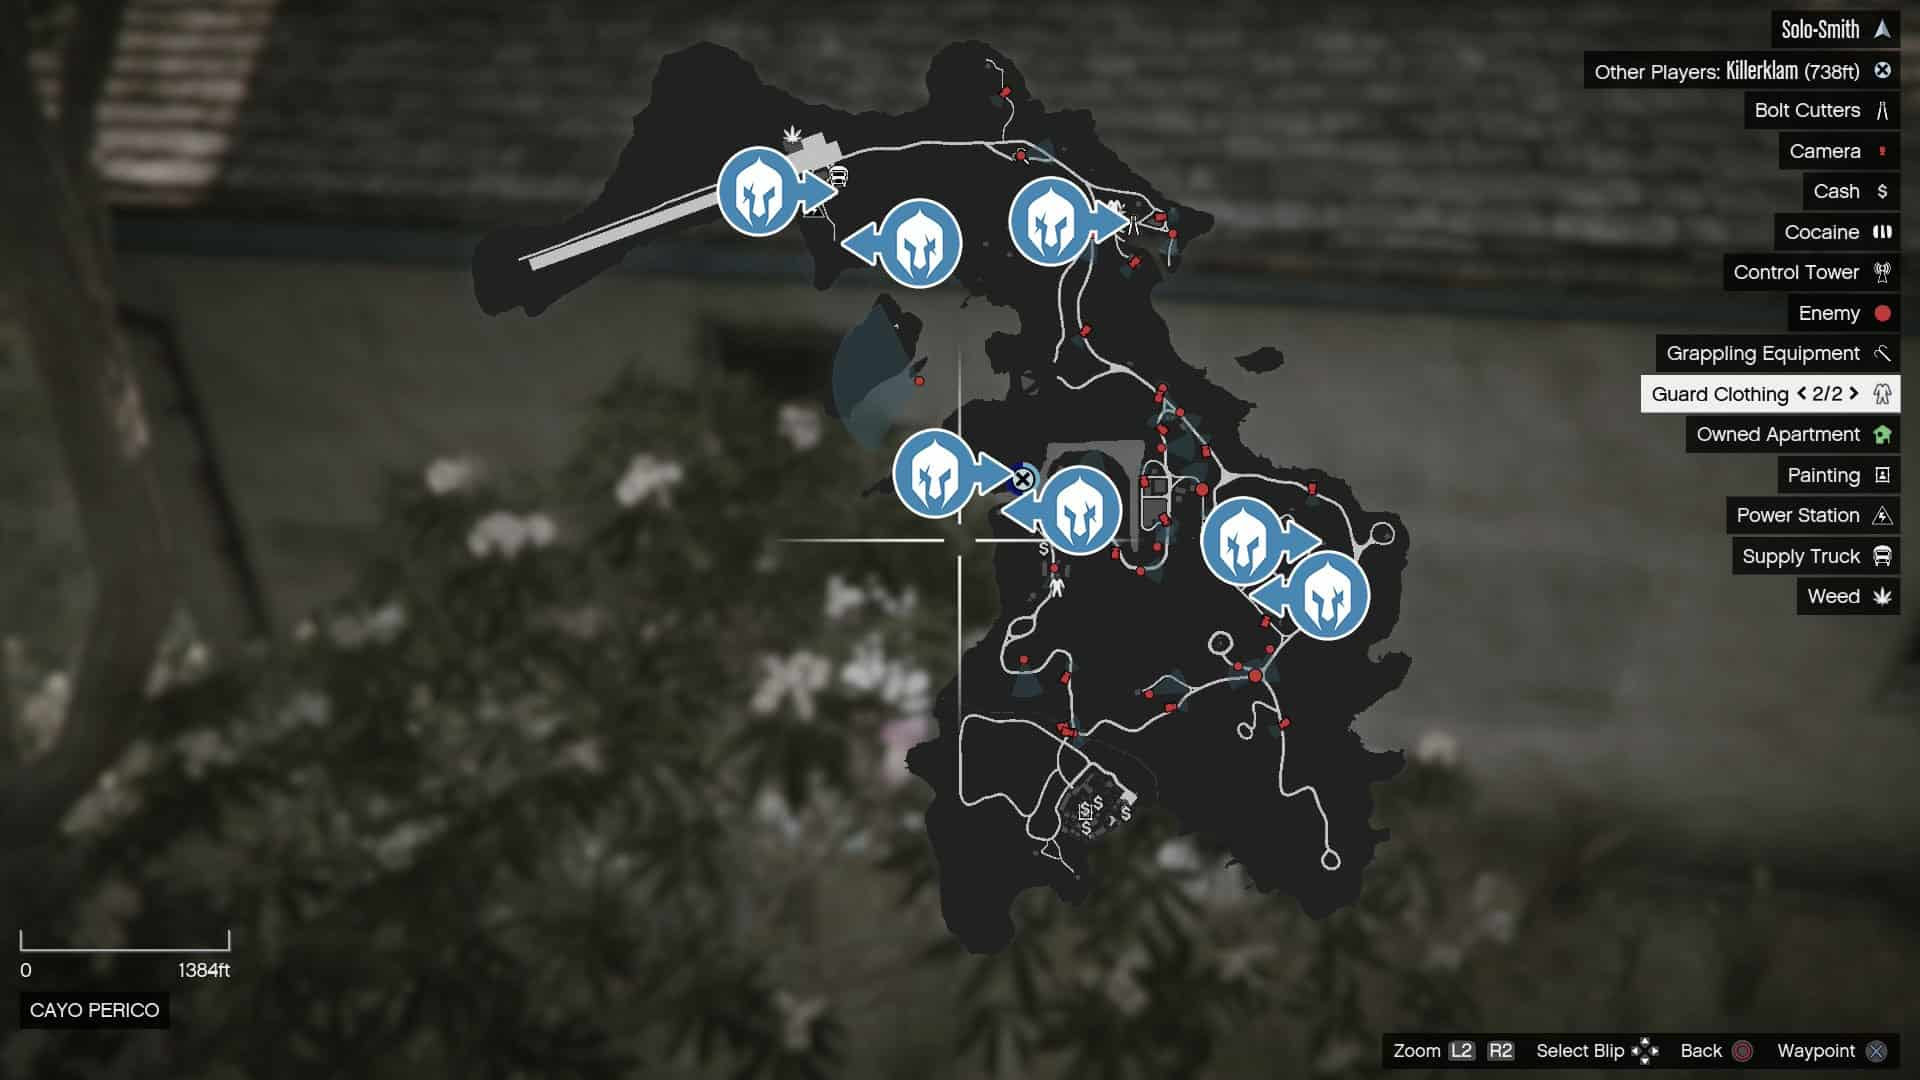 Map of Bolt Cutter Locations